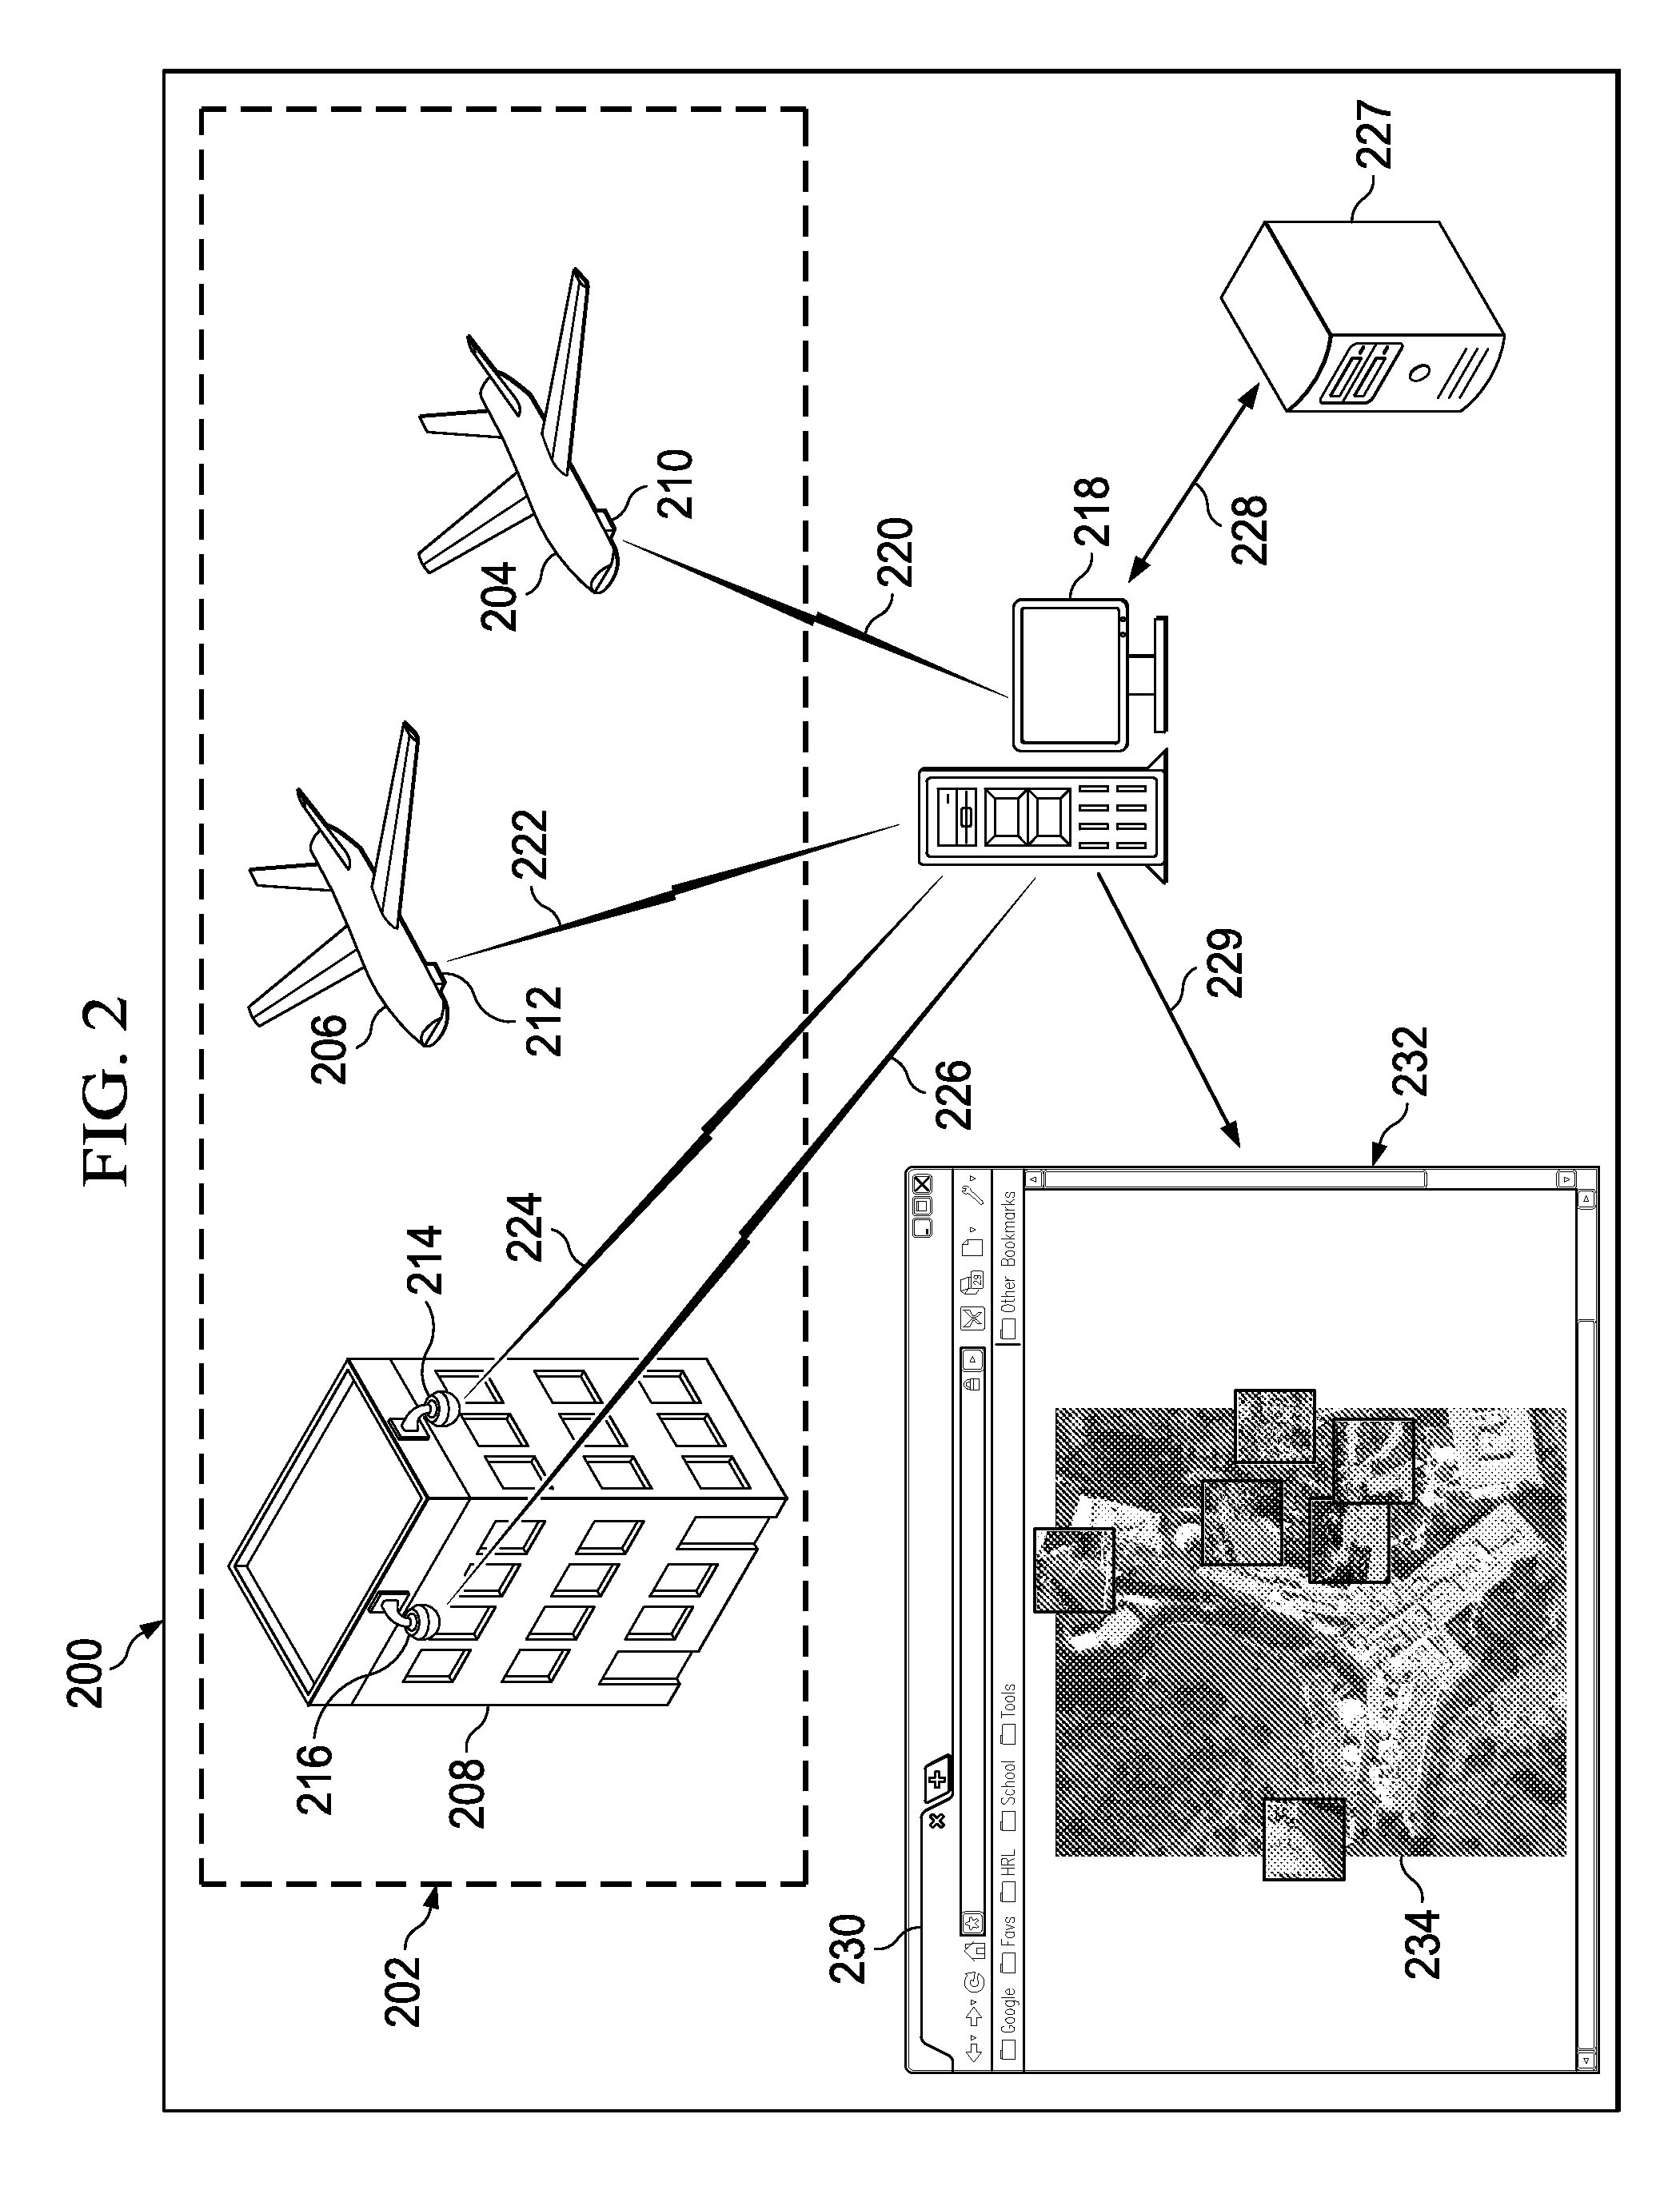 Multi-Sensor Surveillance System with a Common Operating Picture